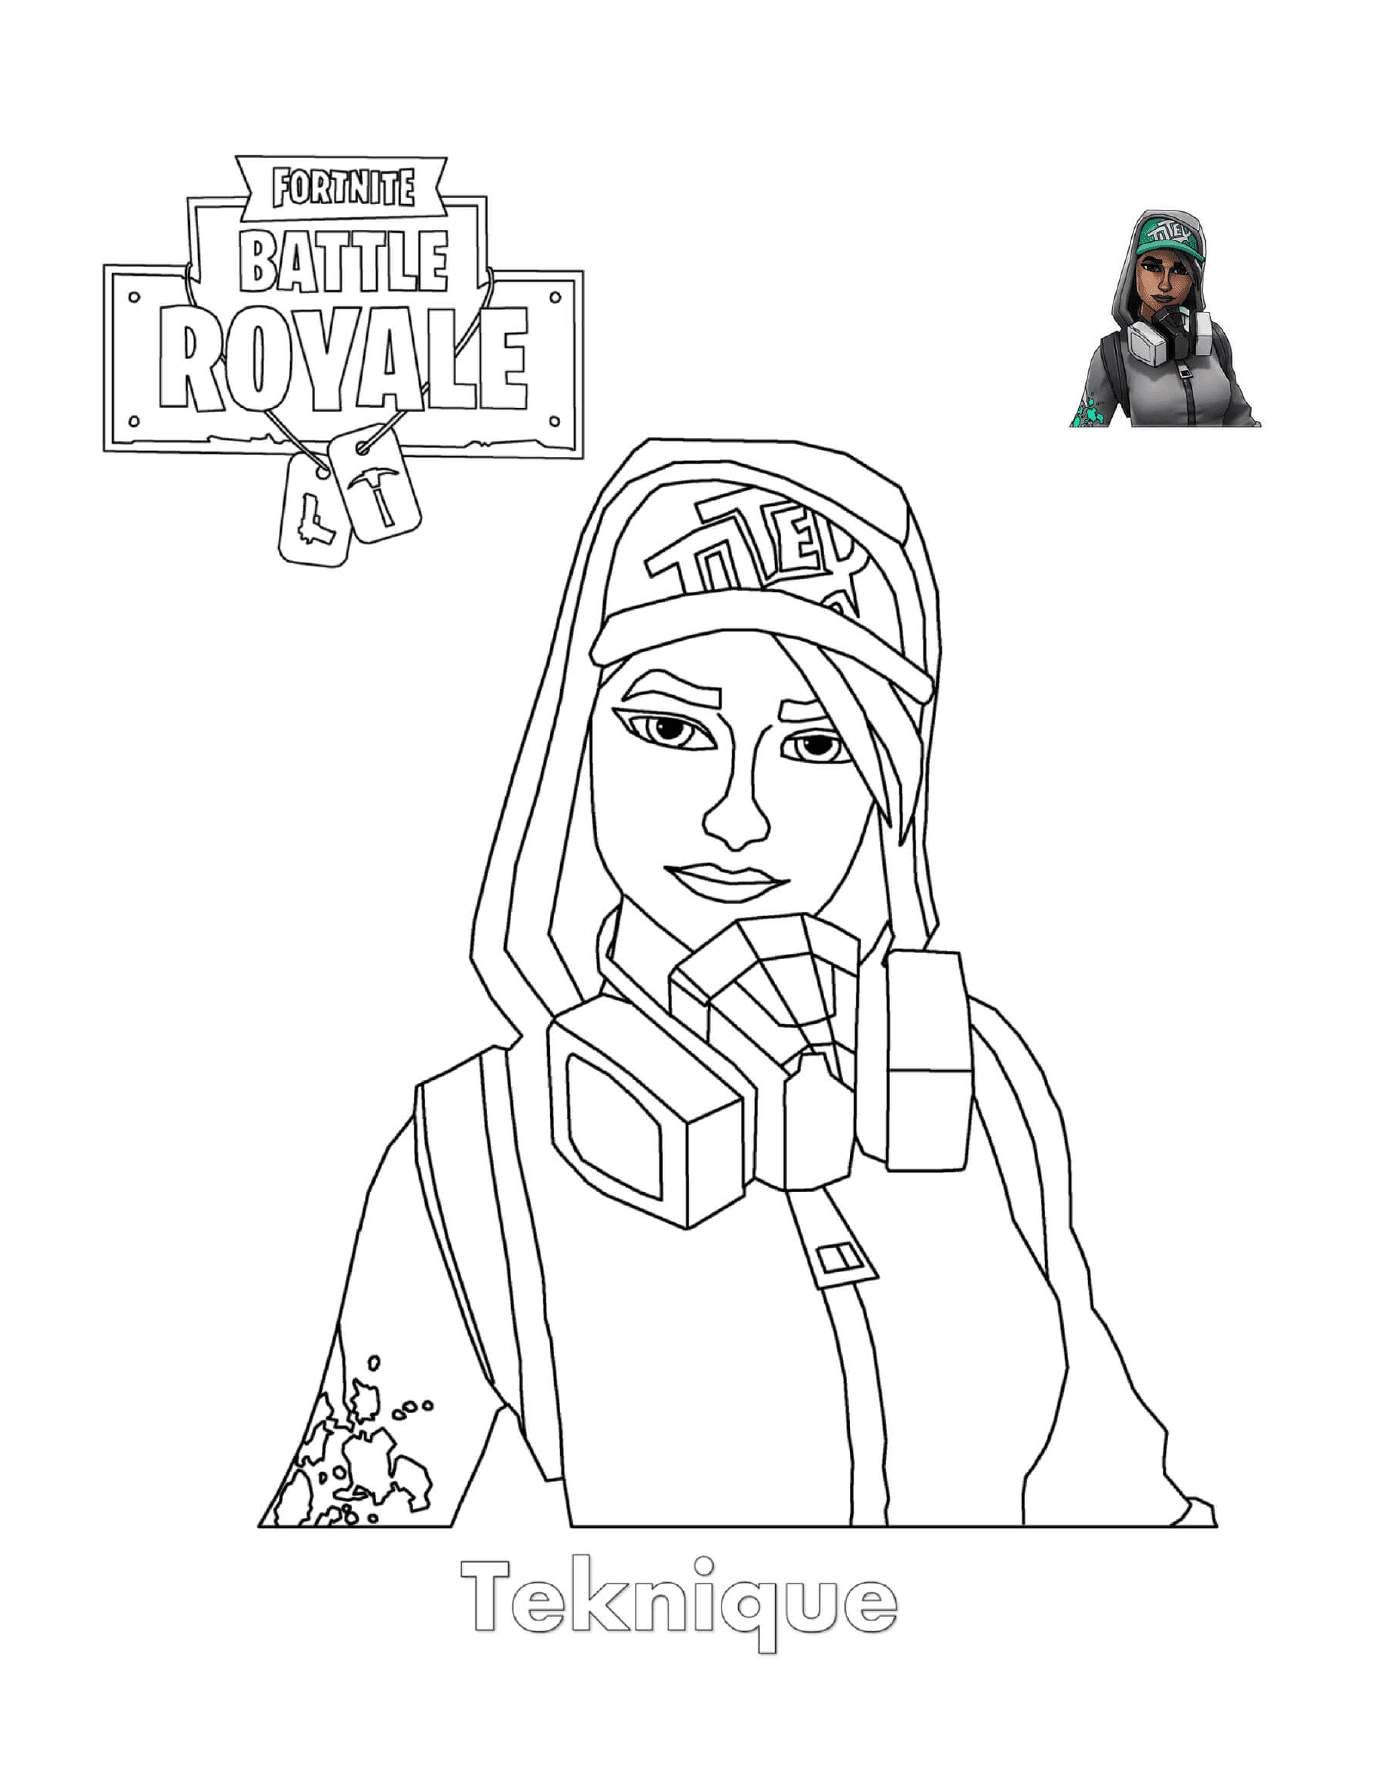  Teknique, a girl from Fortnite 